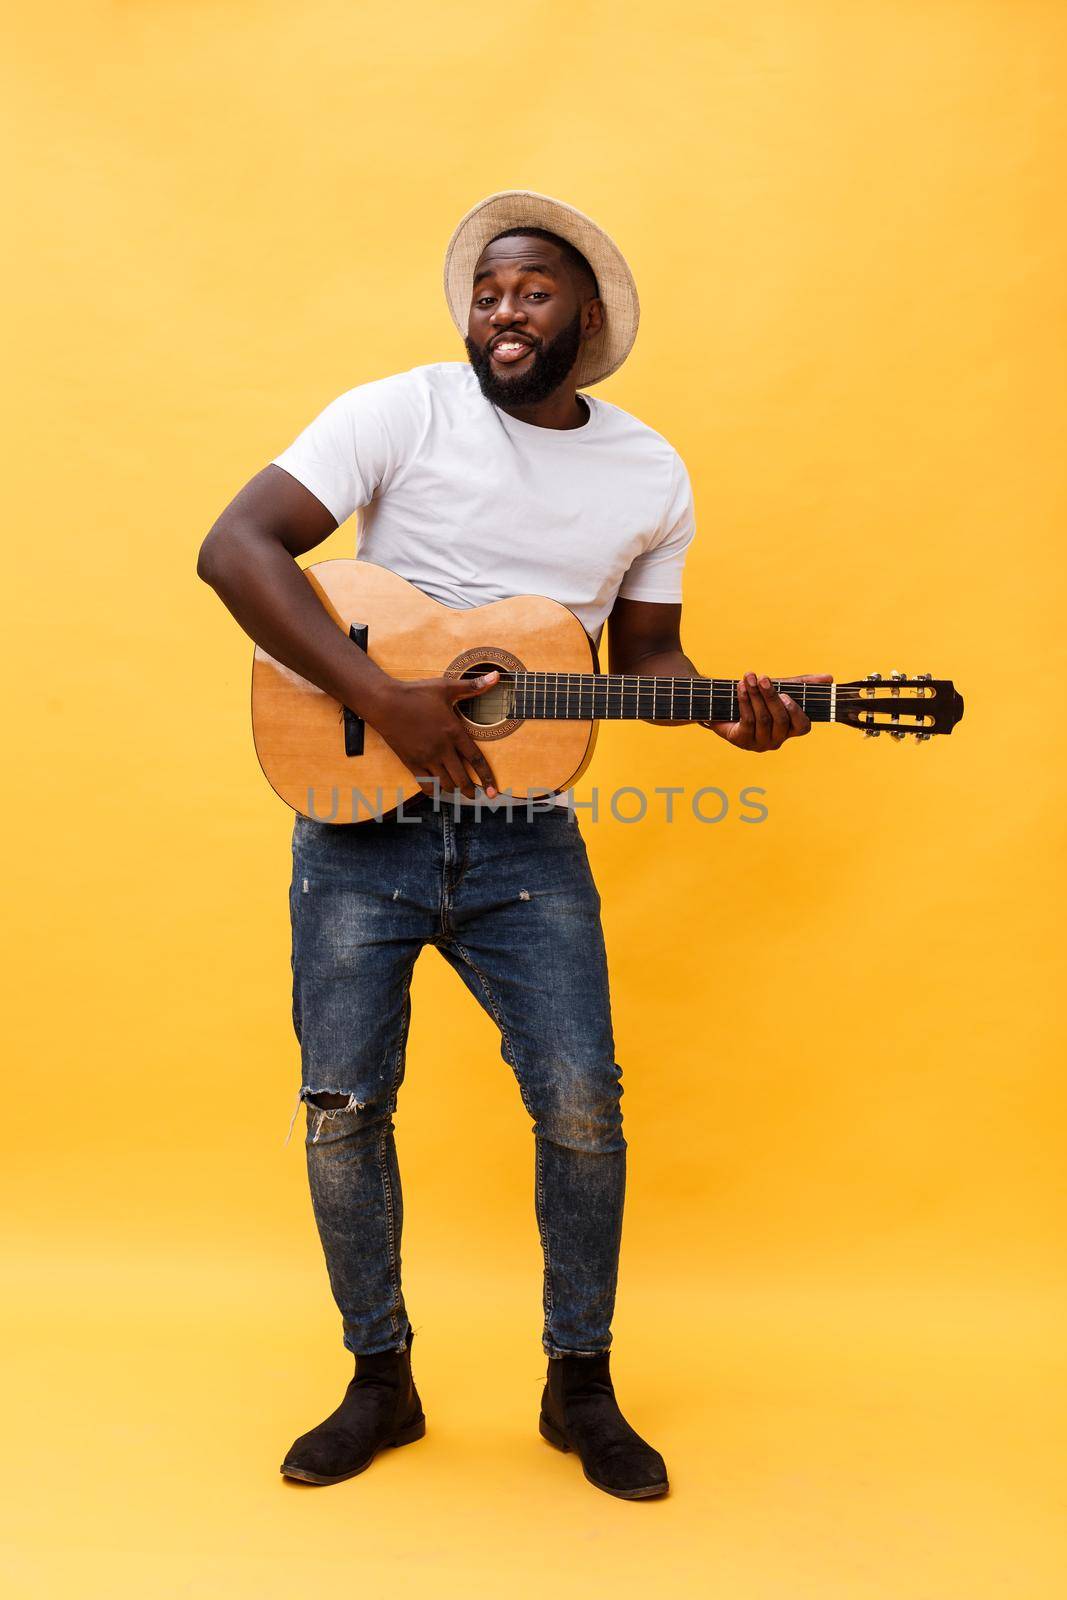 Full-length photo of excited artistic man playing his guitar in casual suite. Isolated on yellow background